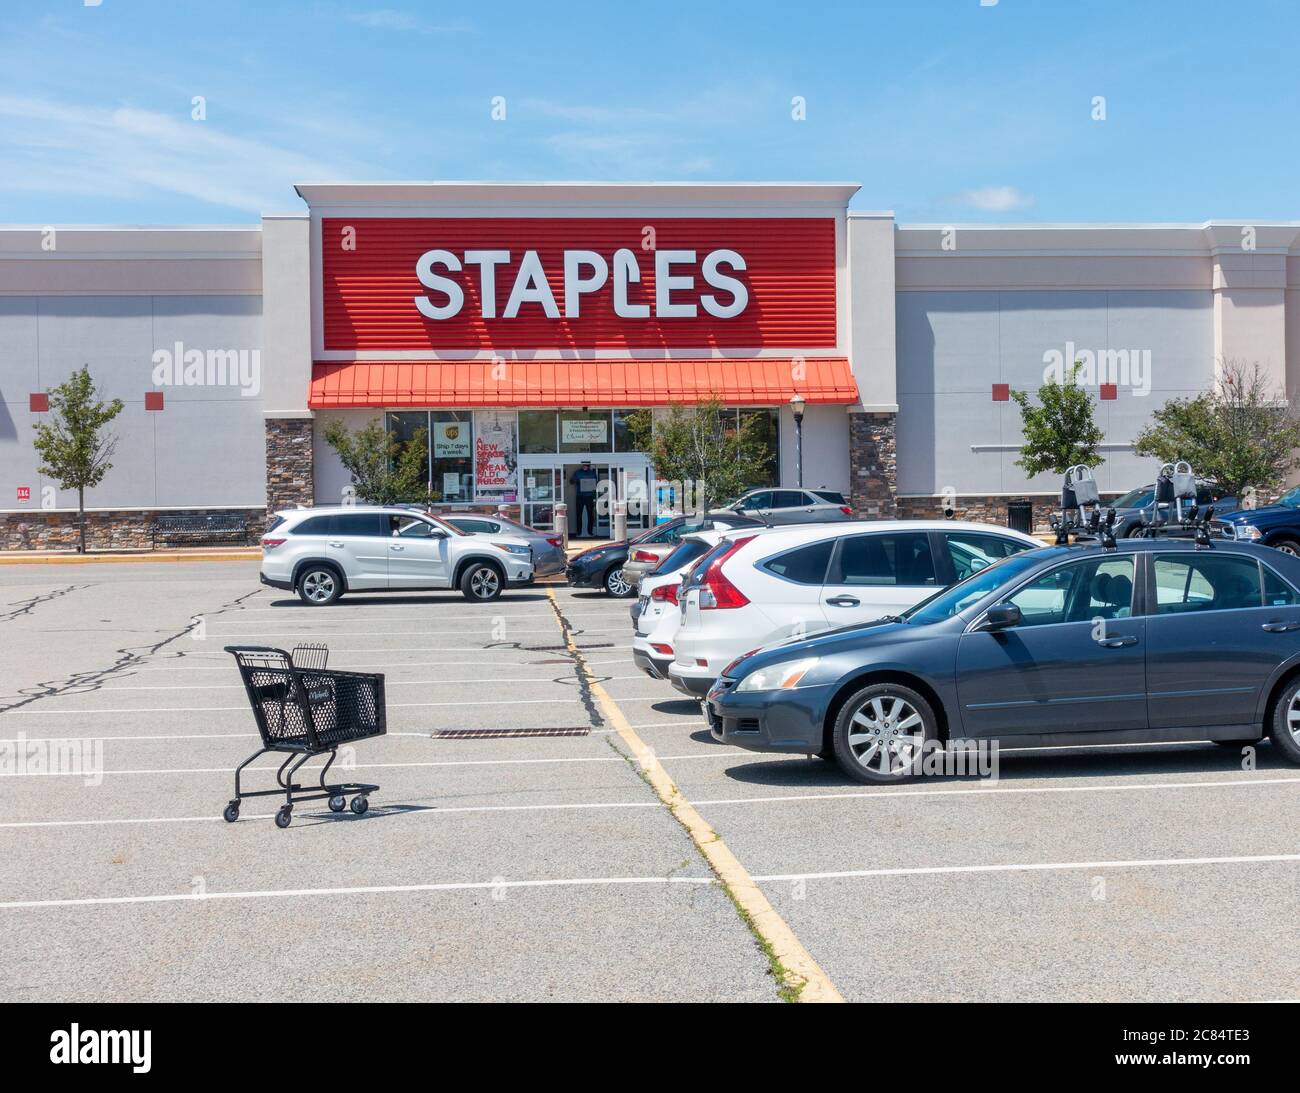 Staples office supply retail store with autos in parking lot. Wareham Crossing, Wareham, MA USA Stock Photo